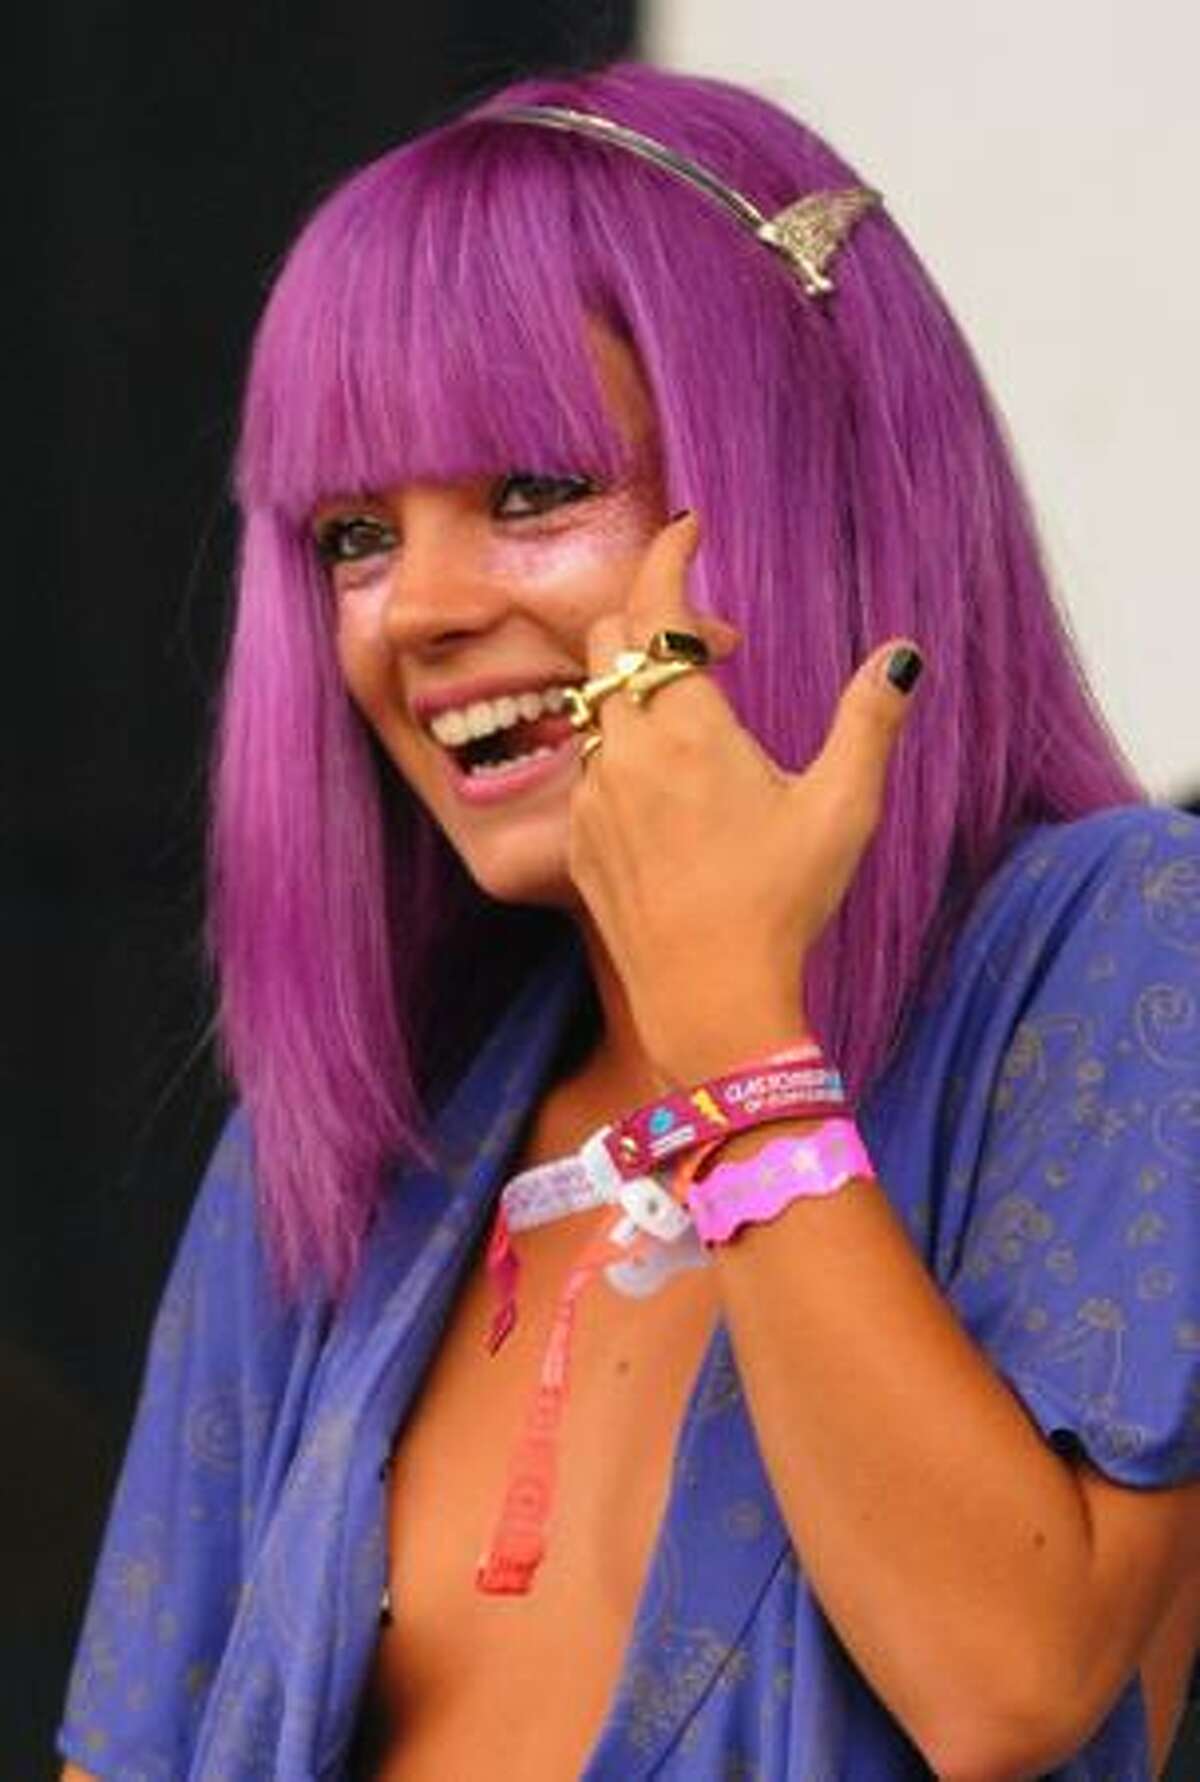 Lily Allen performs on the Pyramid Stage during day 2 of the Glastonbury Festival at Worthy Farm in Pilton in Glastonbury, England.